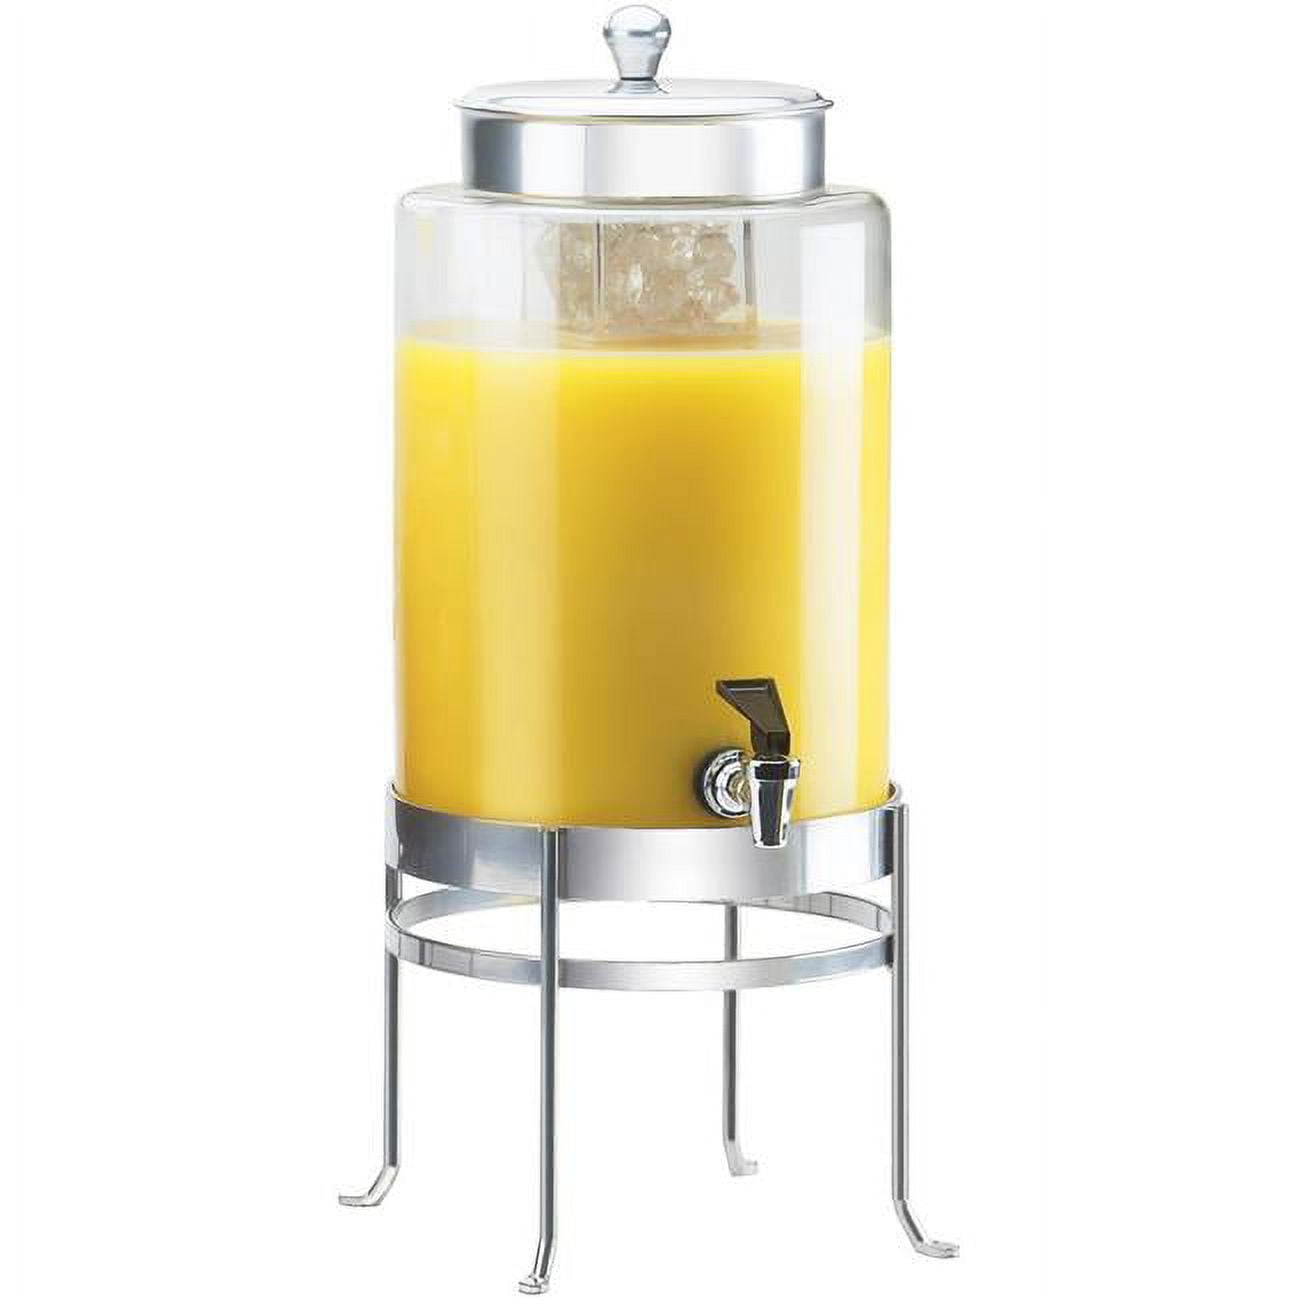 1580-3inf-74 3 Gal Silver Soho Glass Beverage Dispenser With Infusion Chamber - 10 X 12 X 24.5 In.